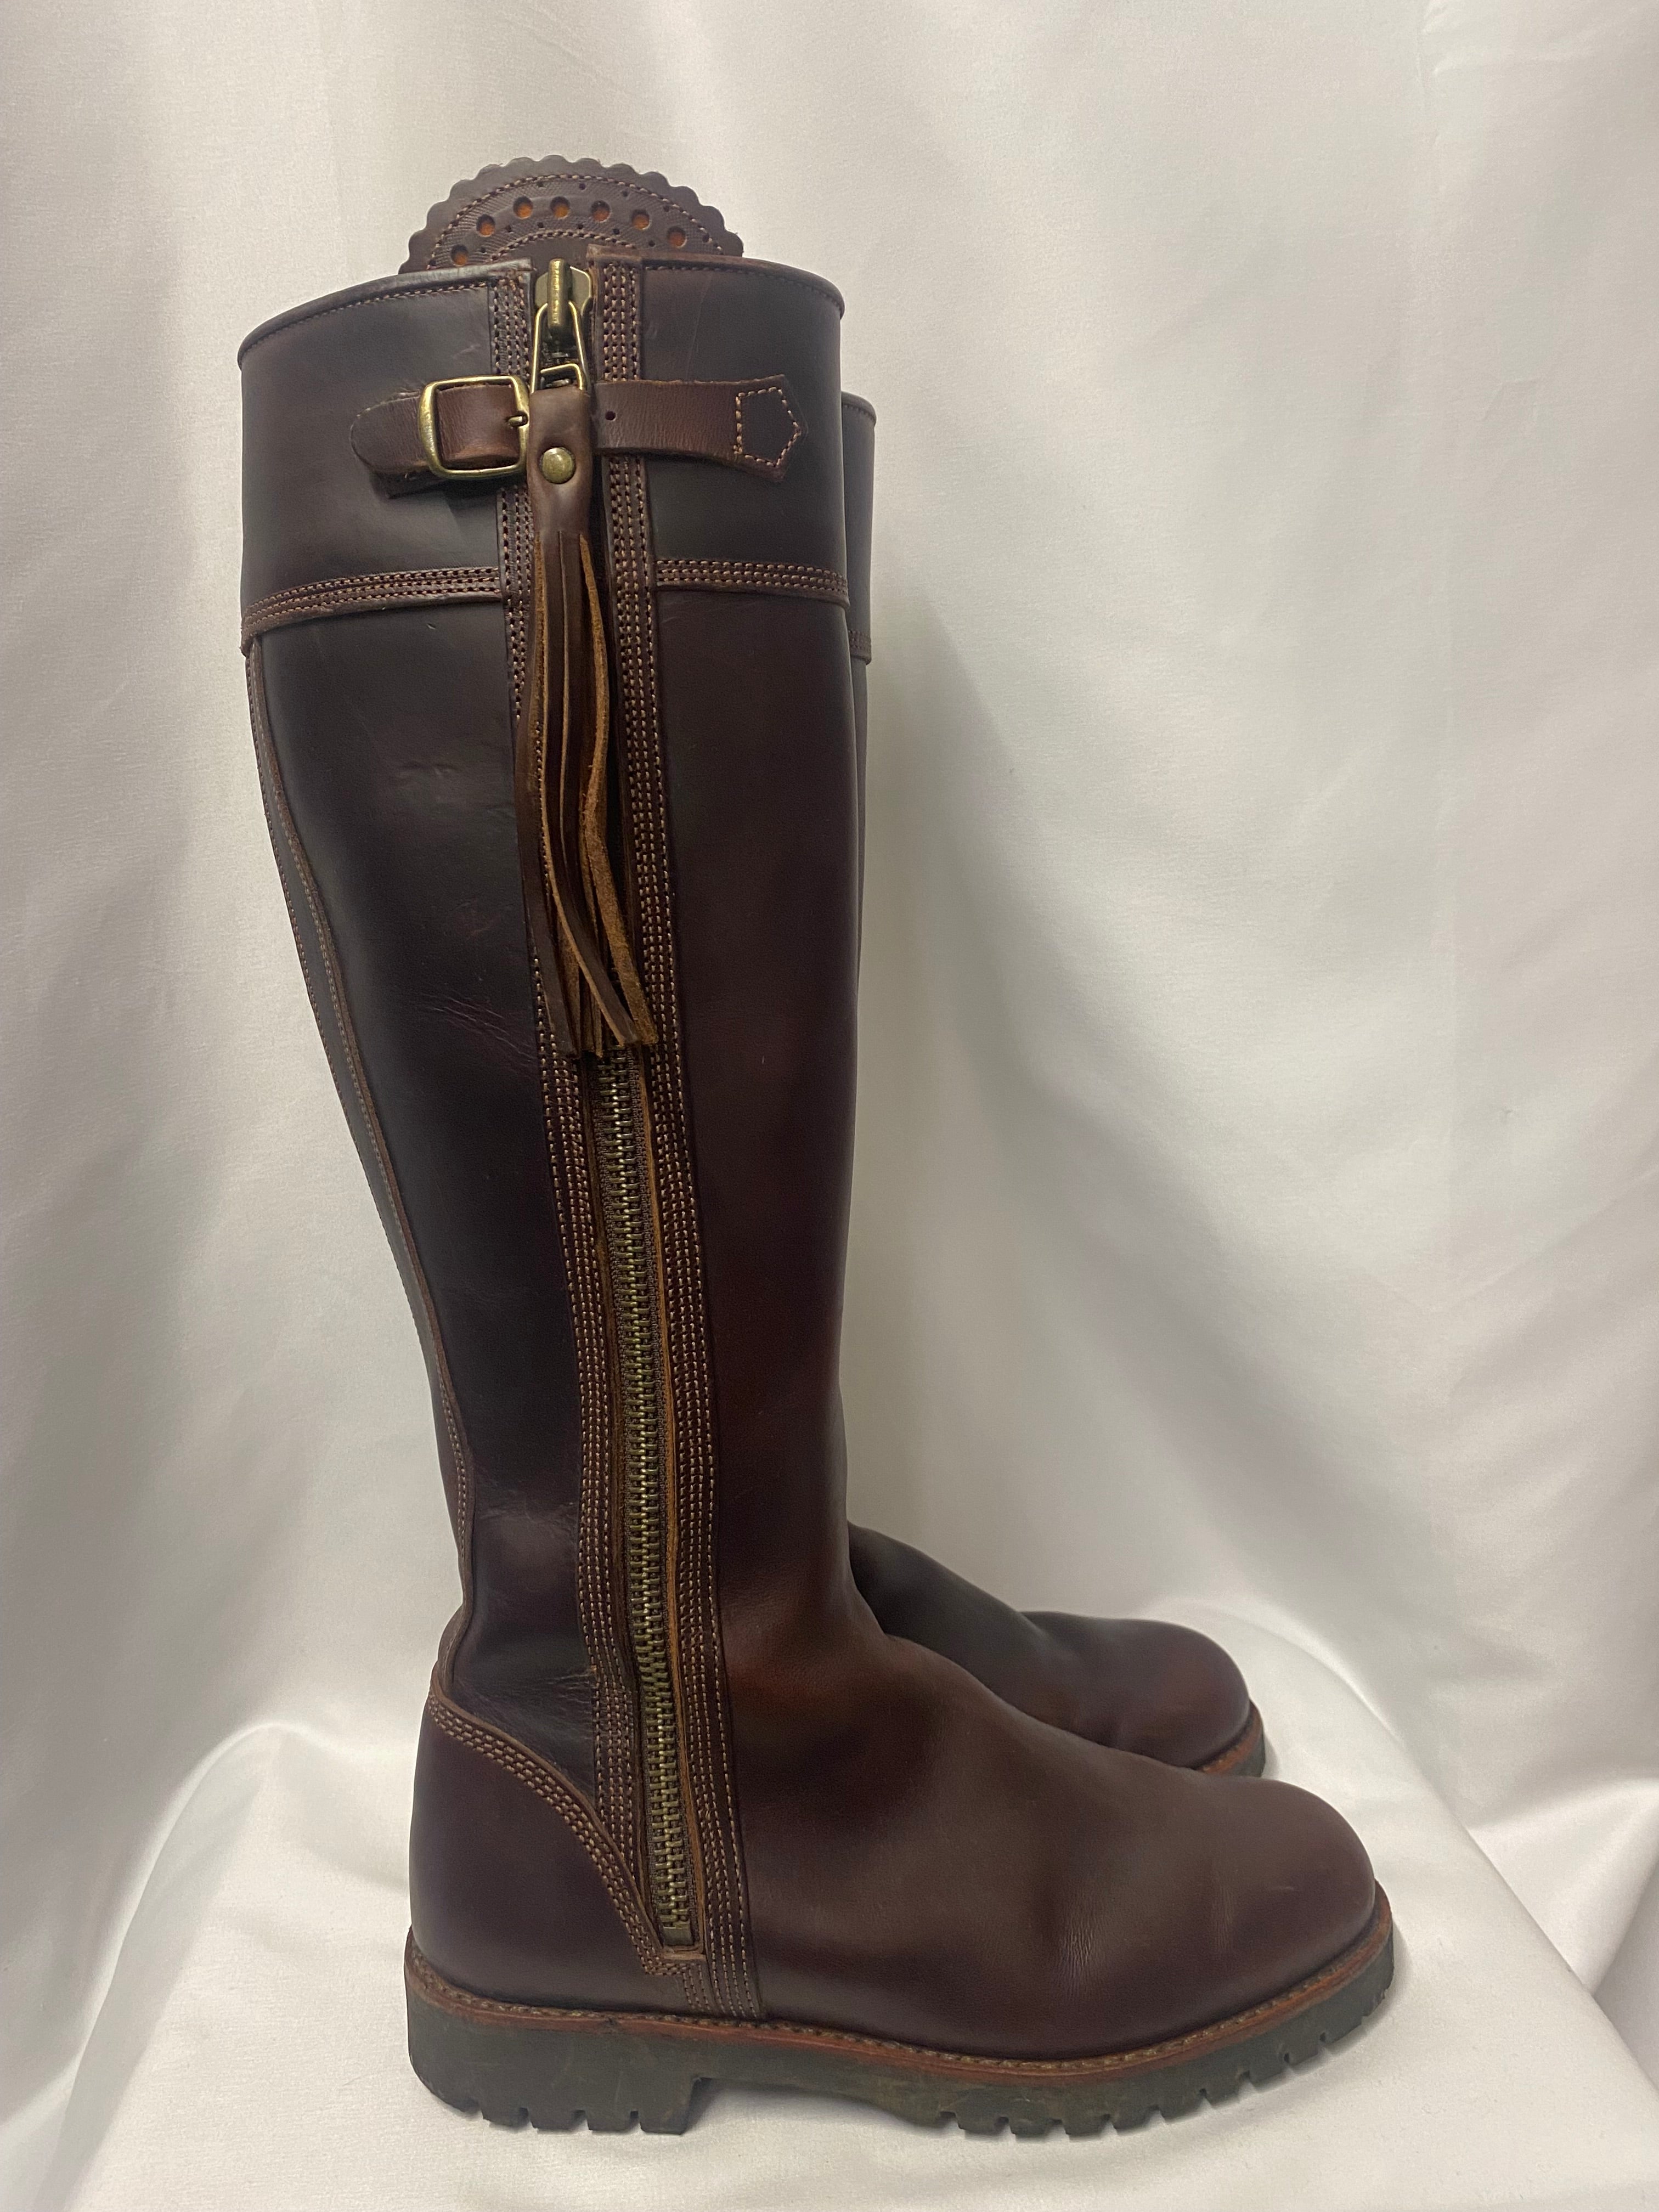 Penelope Chilvers Conker Brown Leather Tassel Calve Length Boots 6 ...